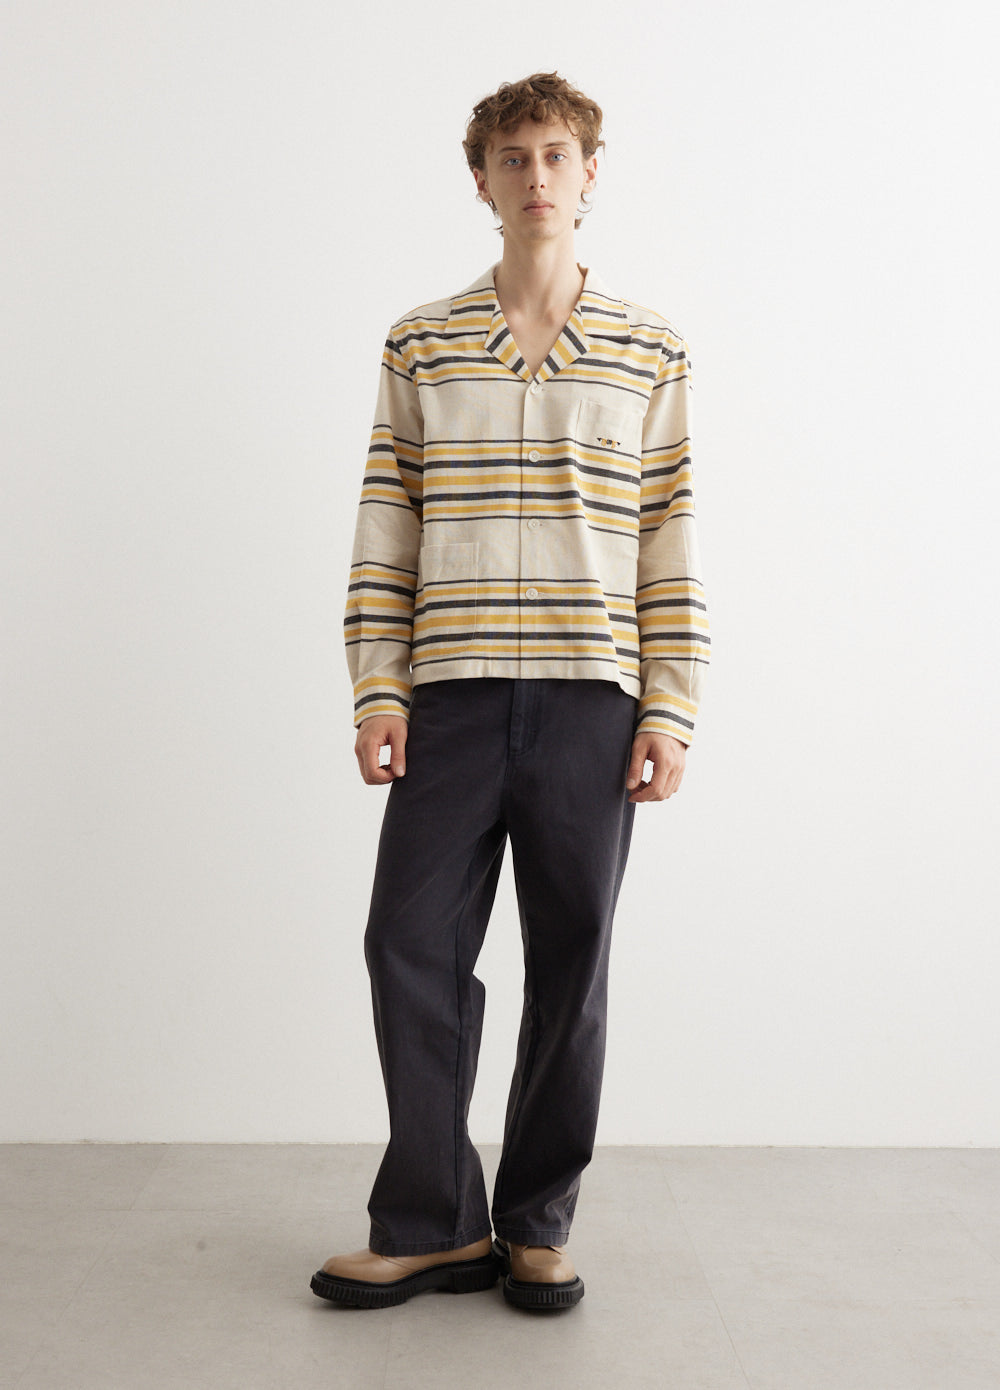 Twill Knolly Brook Trousers